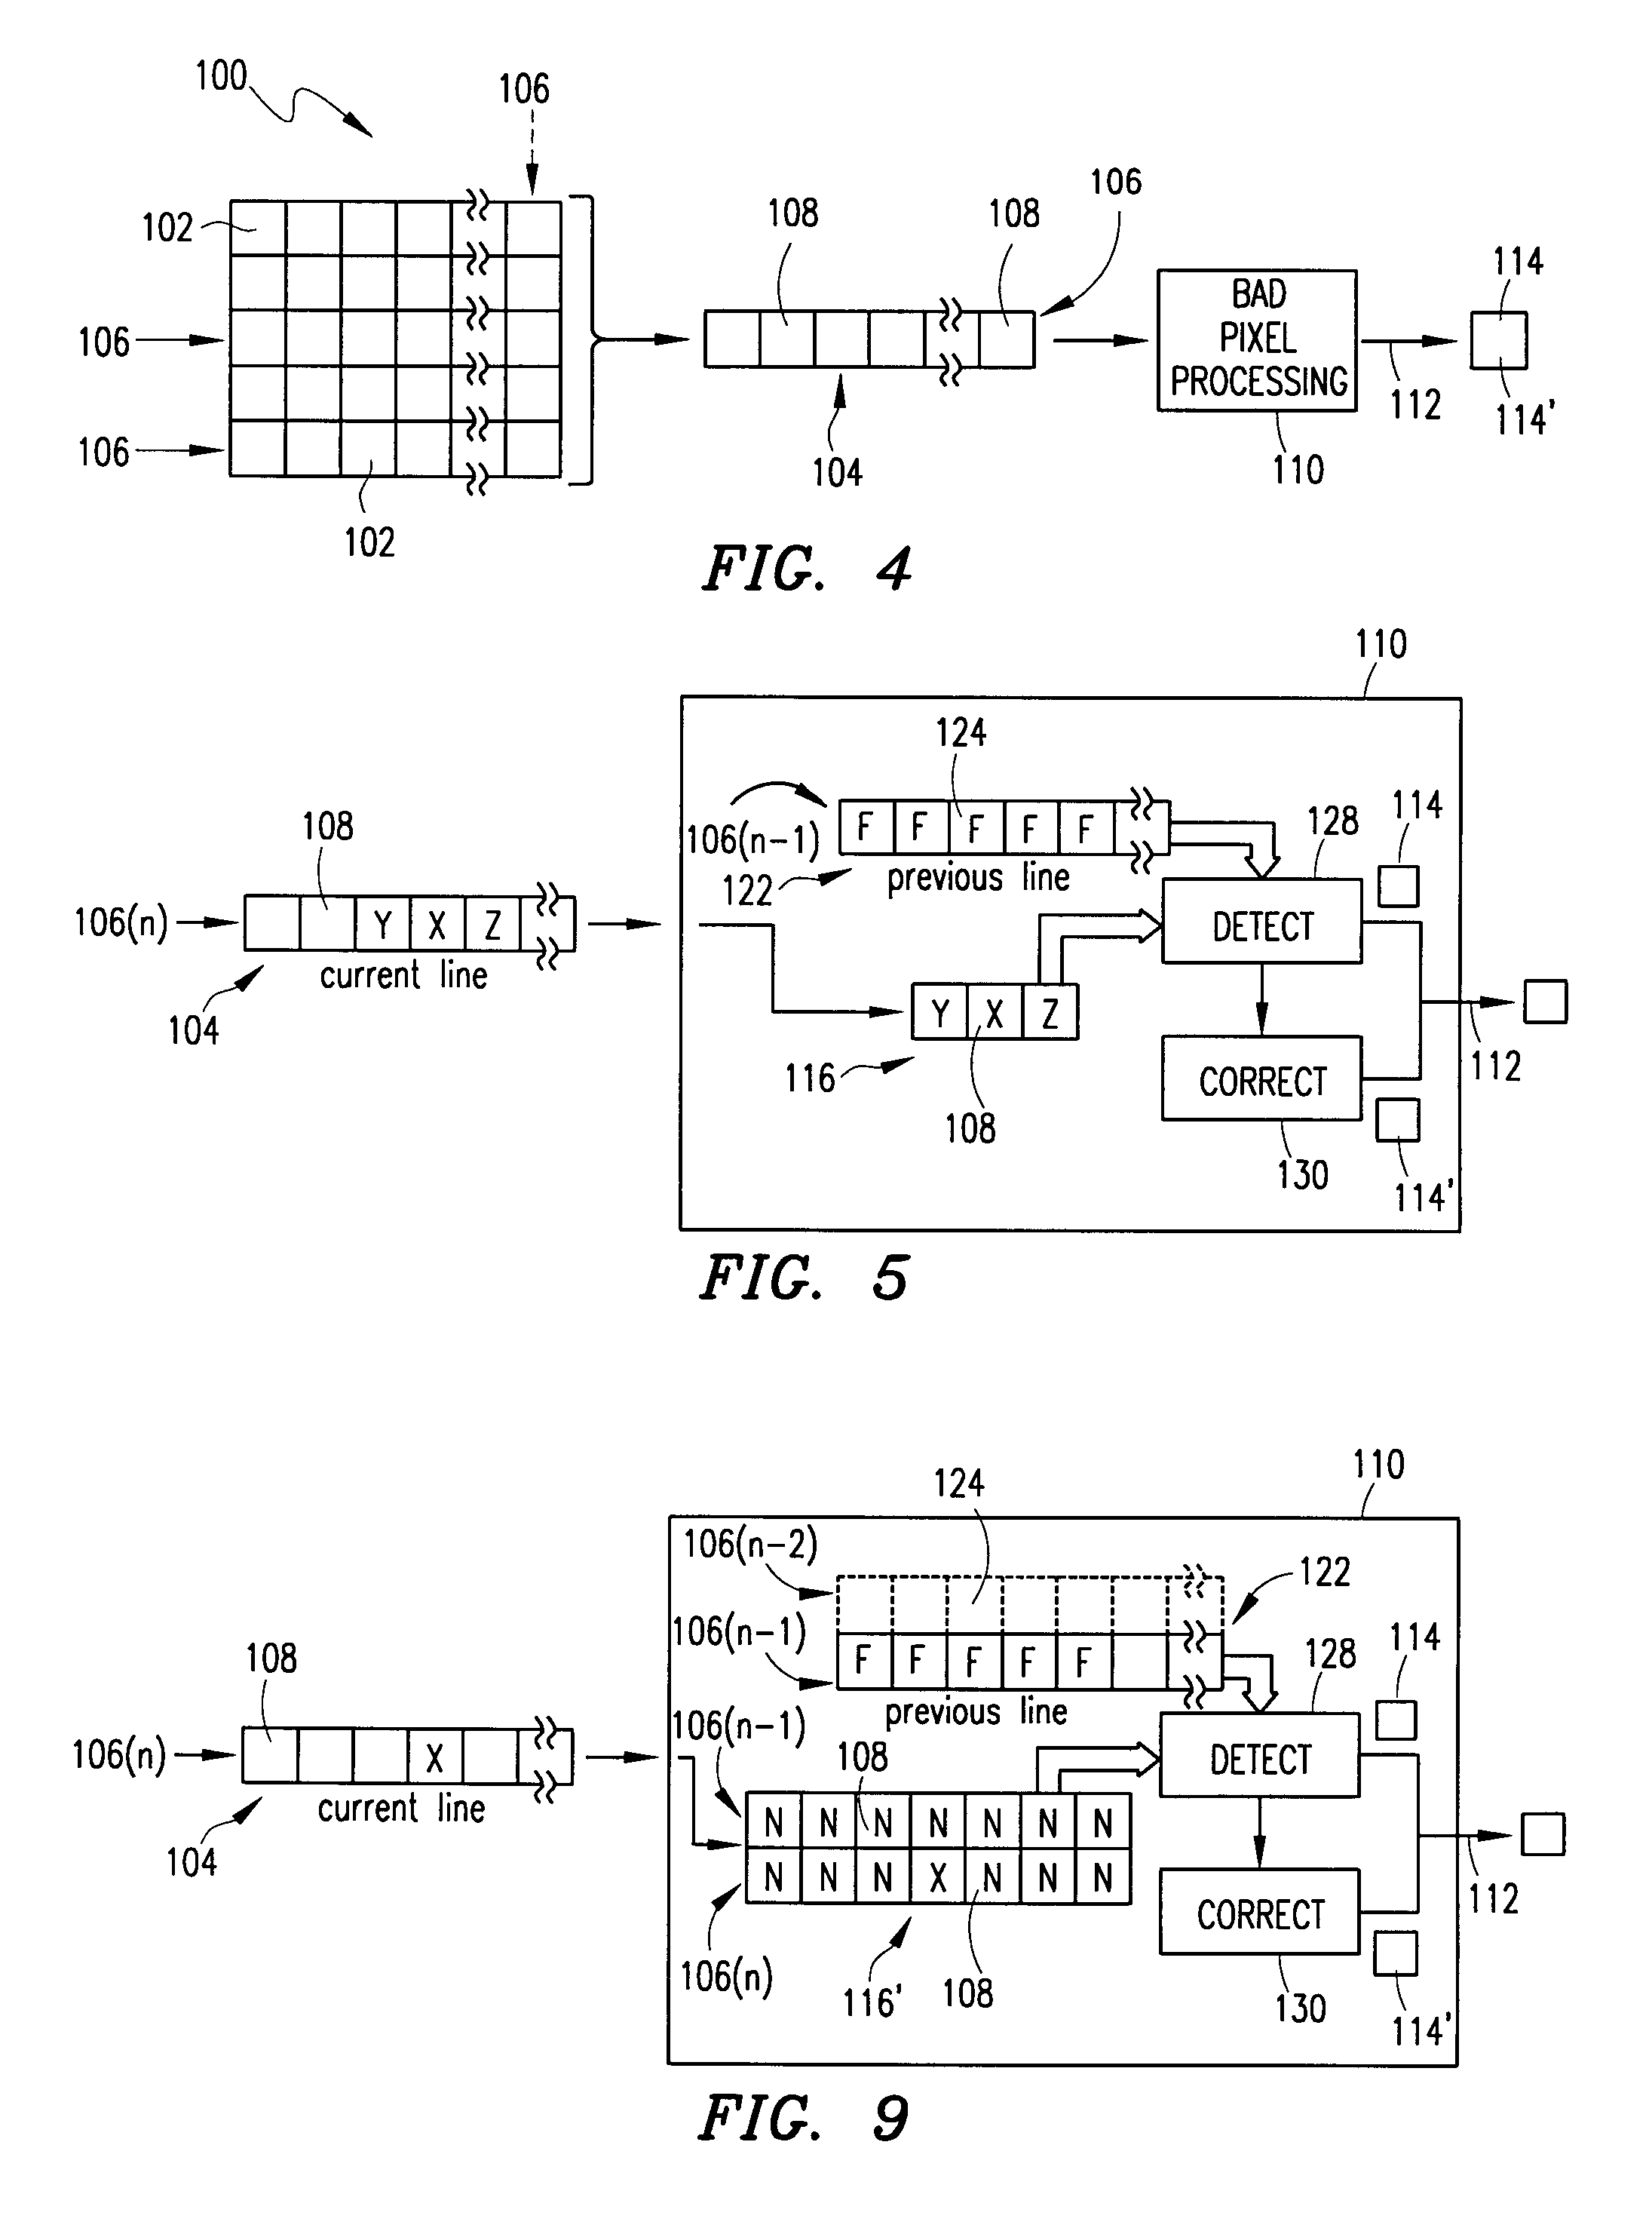 Bad pixel detection and correction in an image sensing device